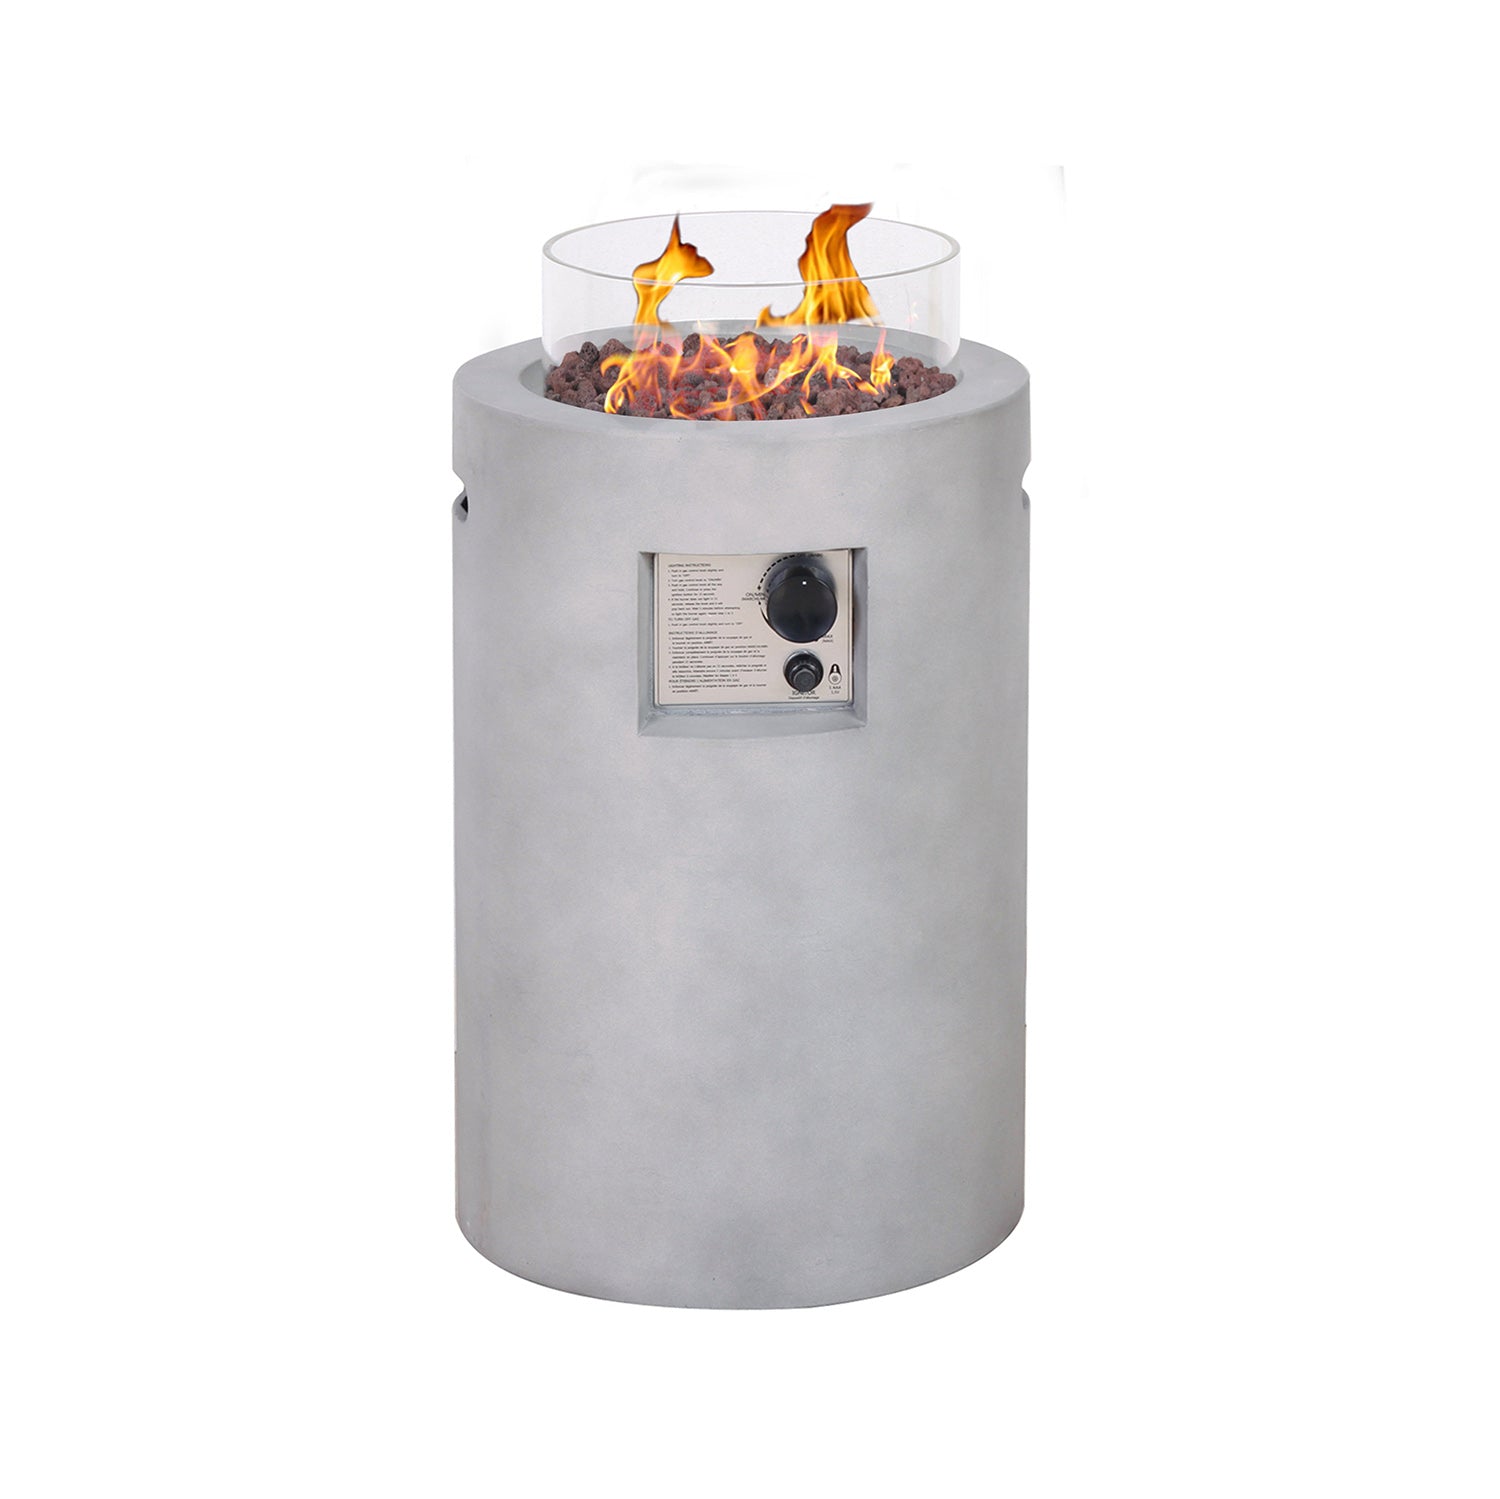 Real Concrete Cylinder 25" (63.5cm) Tall Patio Heater